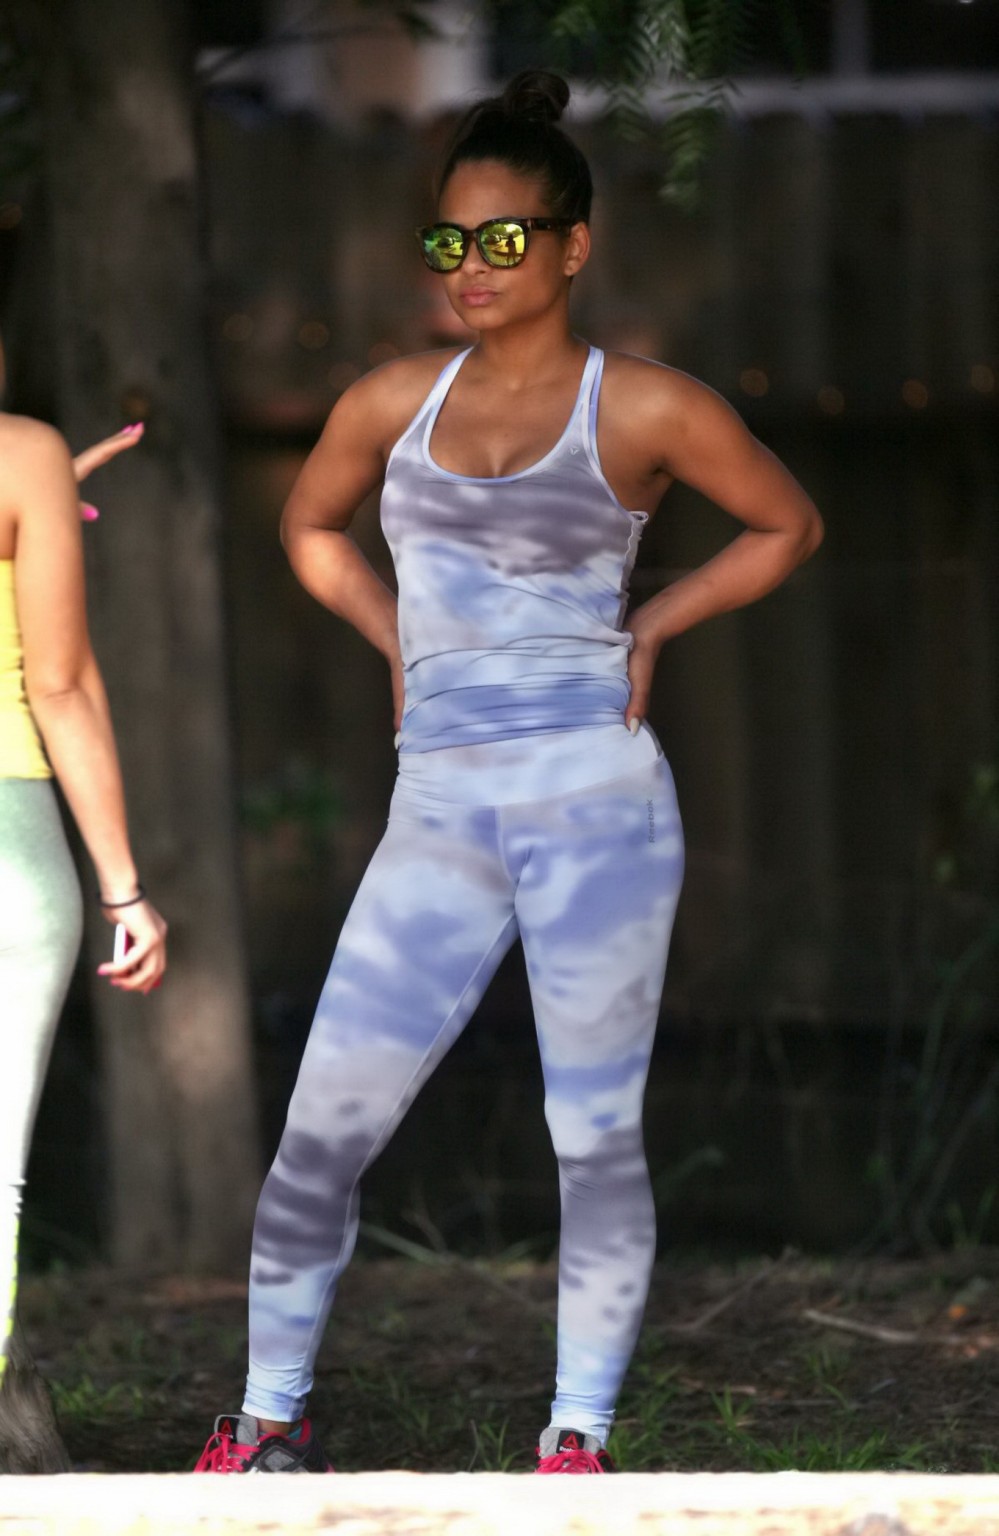 Christina Milian busty and booty in tiny top and tights while working out at the #75173947